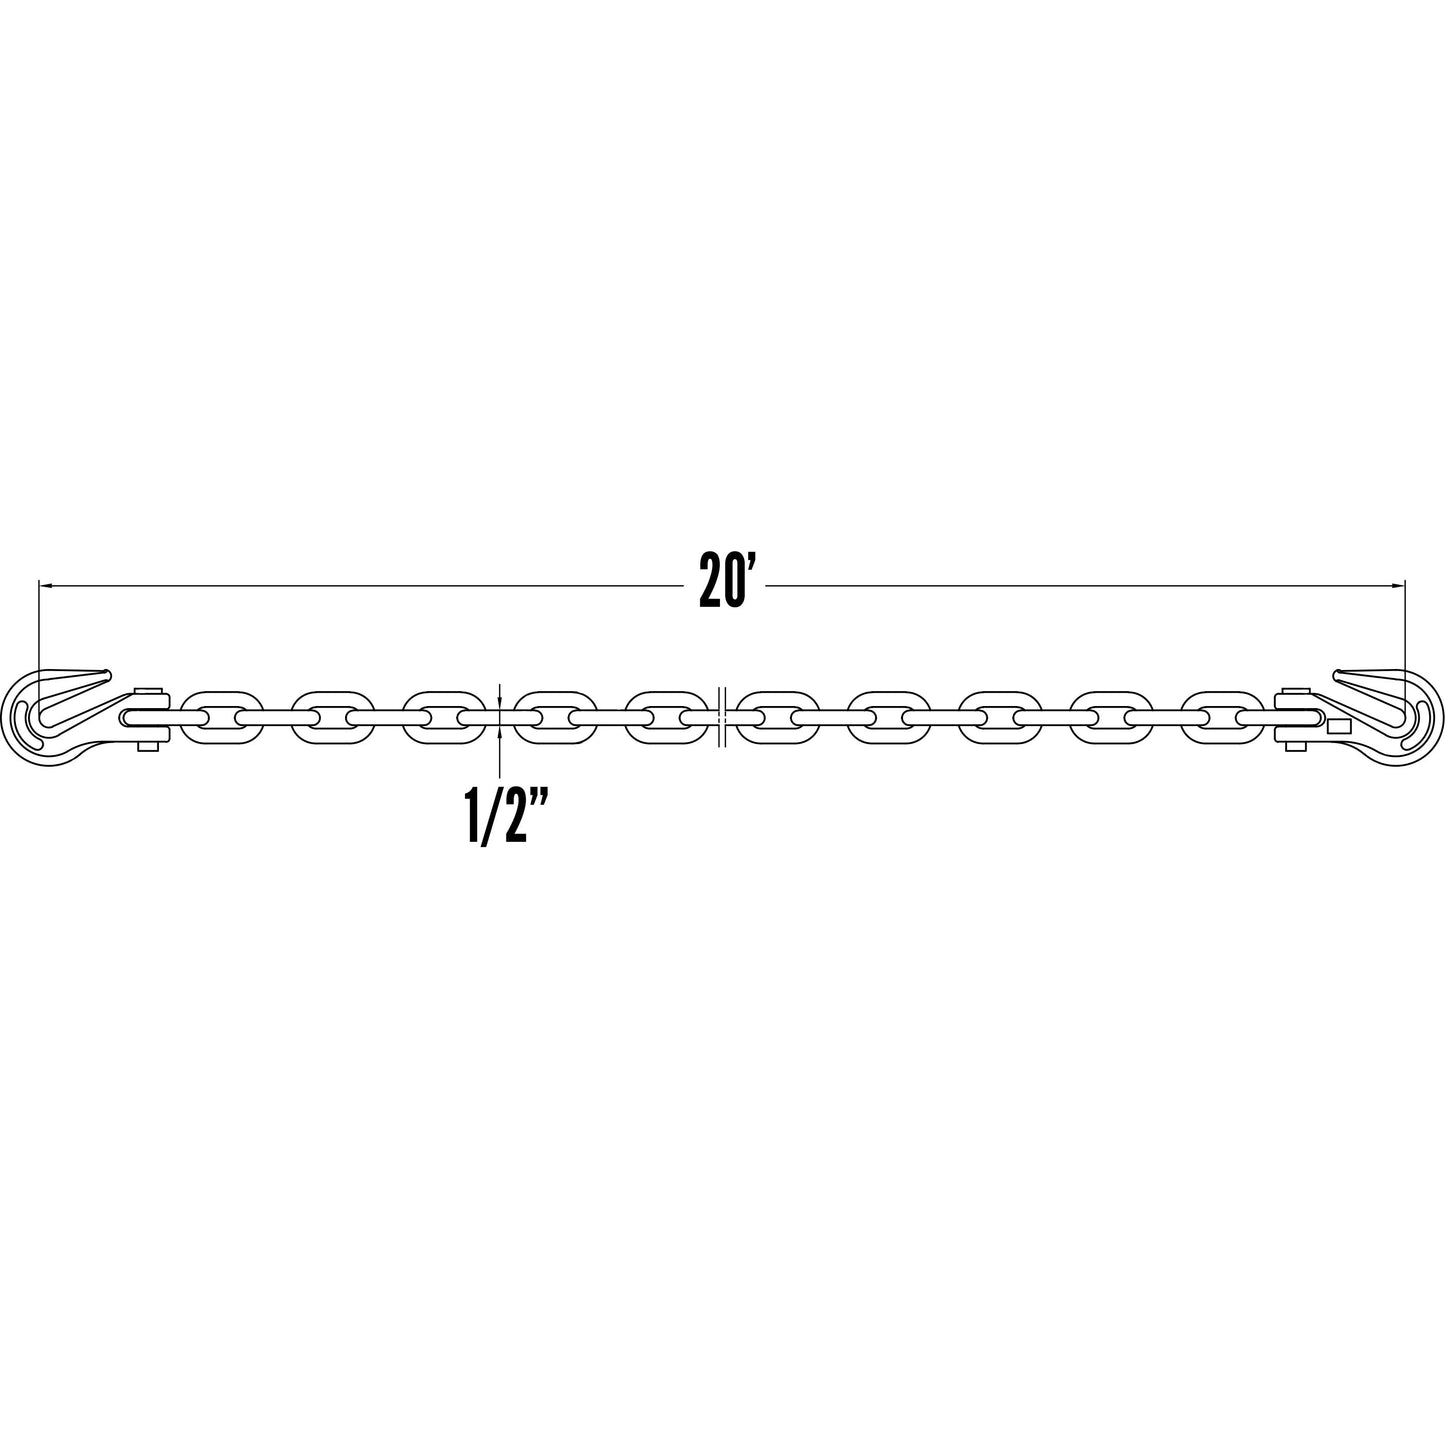 12 inch x 20 foot CM Transport Chain Grade 70 image 4 of 7